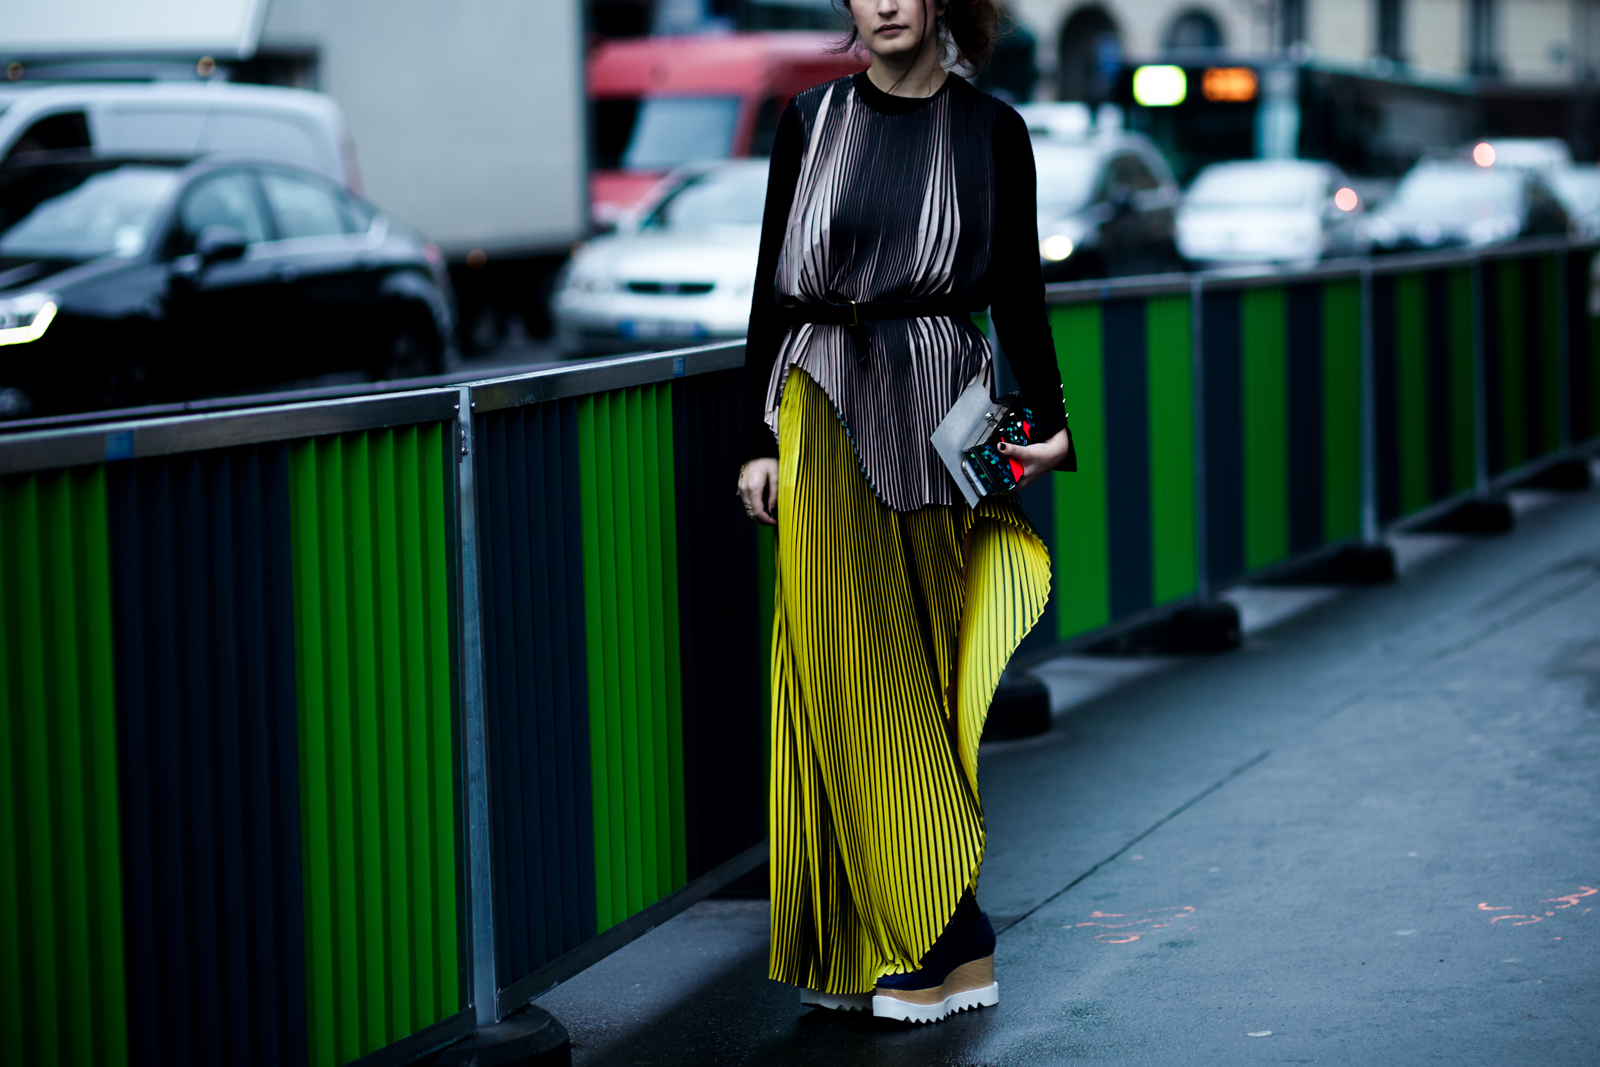 PFW Street Style: A woman wearing a Stella McCartney pleated skirt and top before the Stella McCartney fashion show in Paris